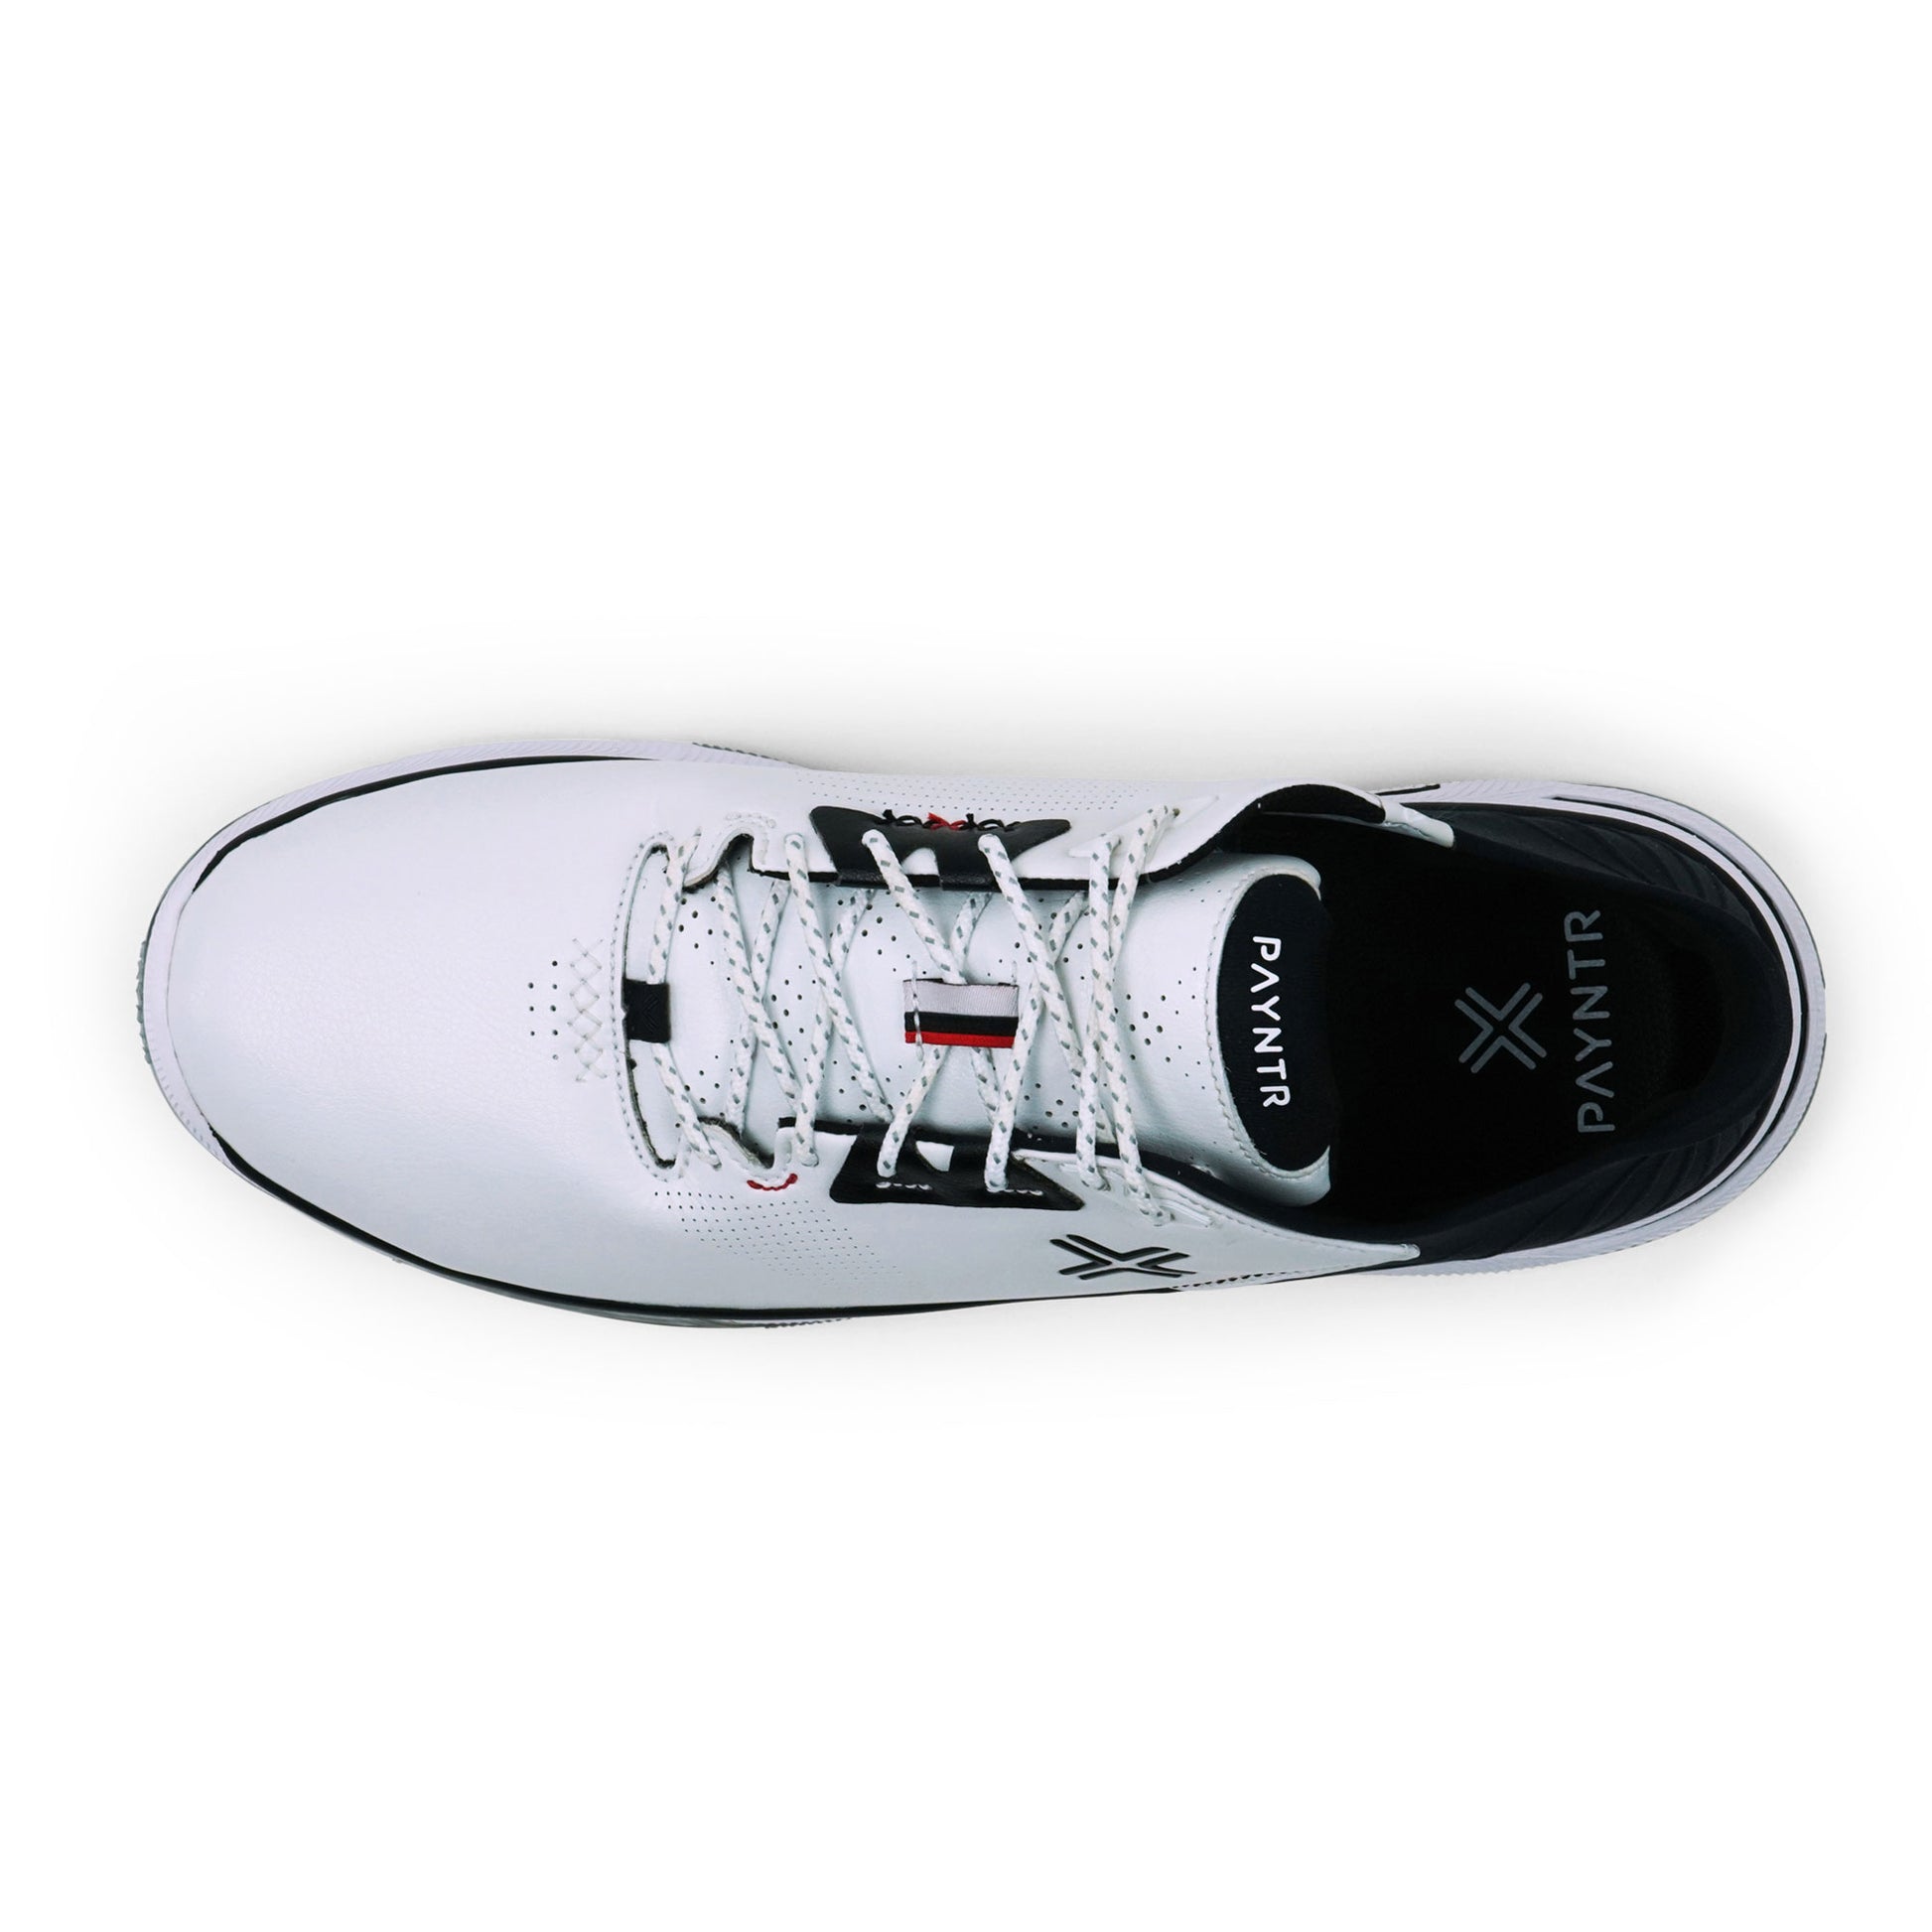 PAYNTR X-004 RS Spiked Golf Shoe (White/Black) - Top